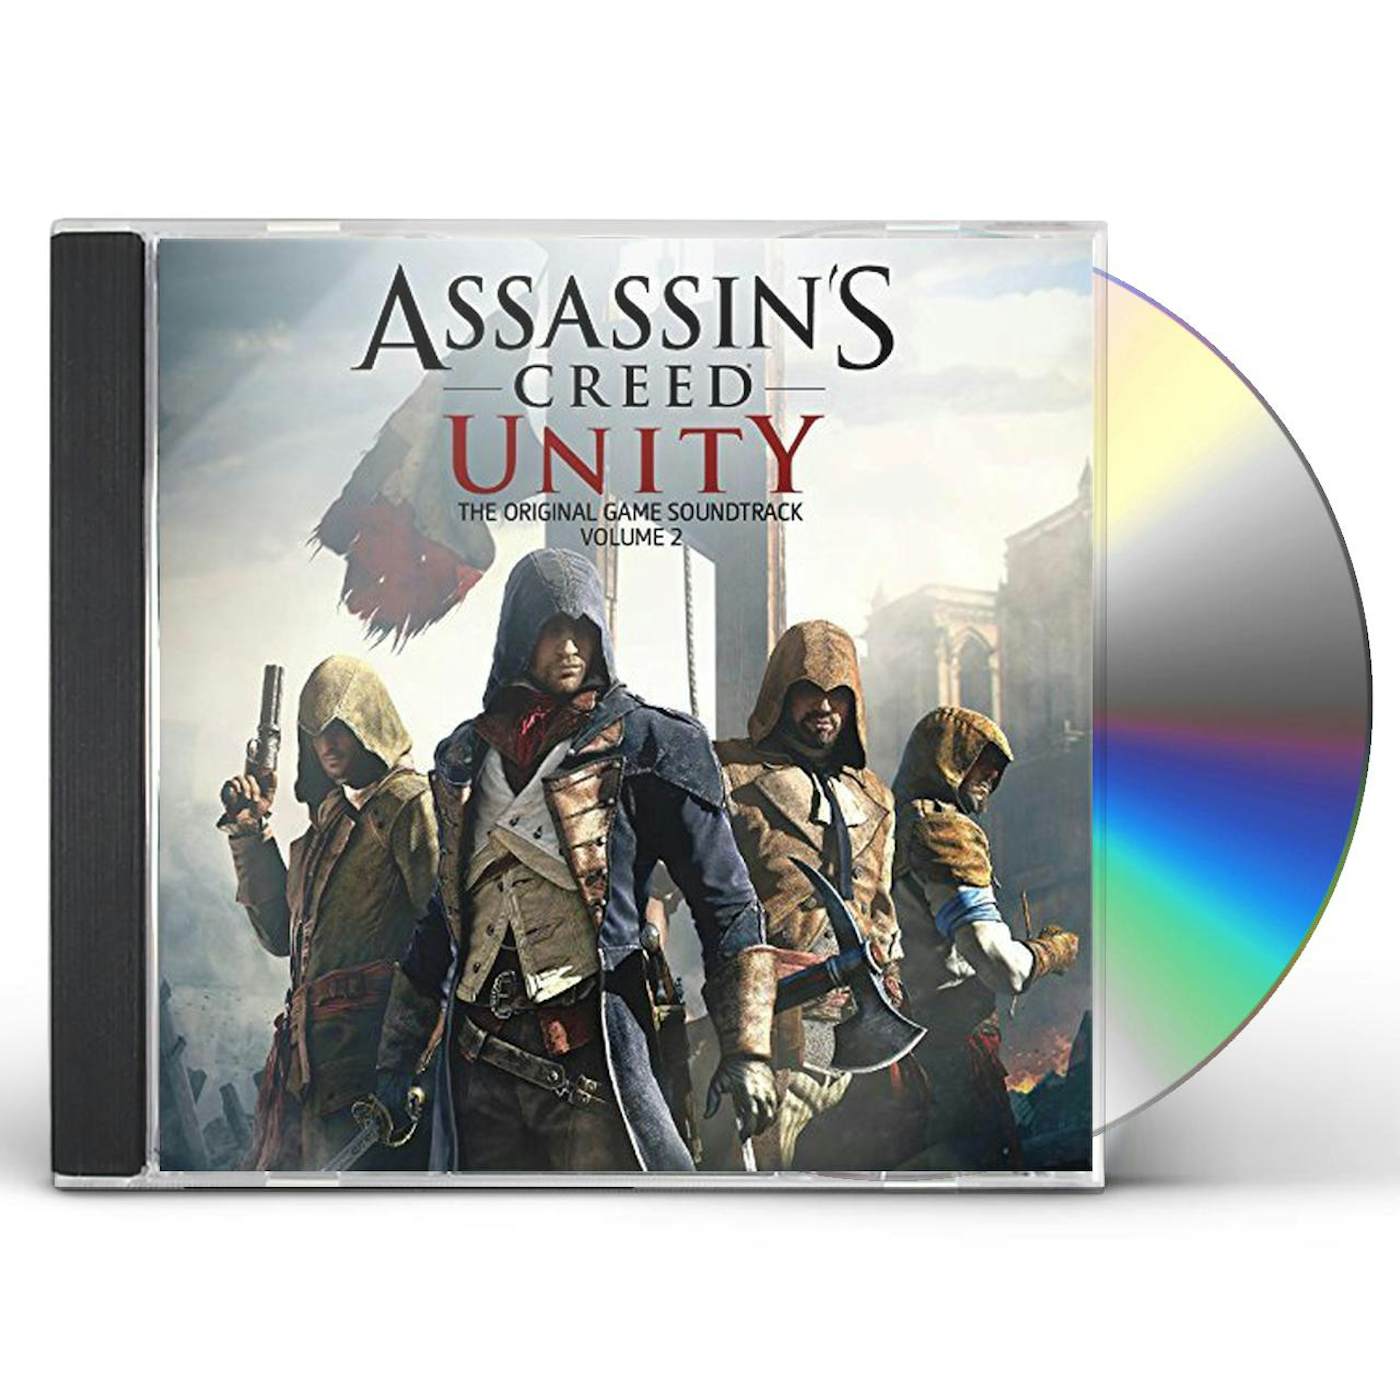 Assassin's Creed Unity Dead Kings (Original Game Soundtrack